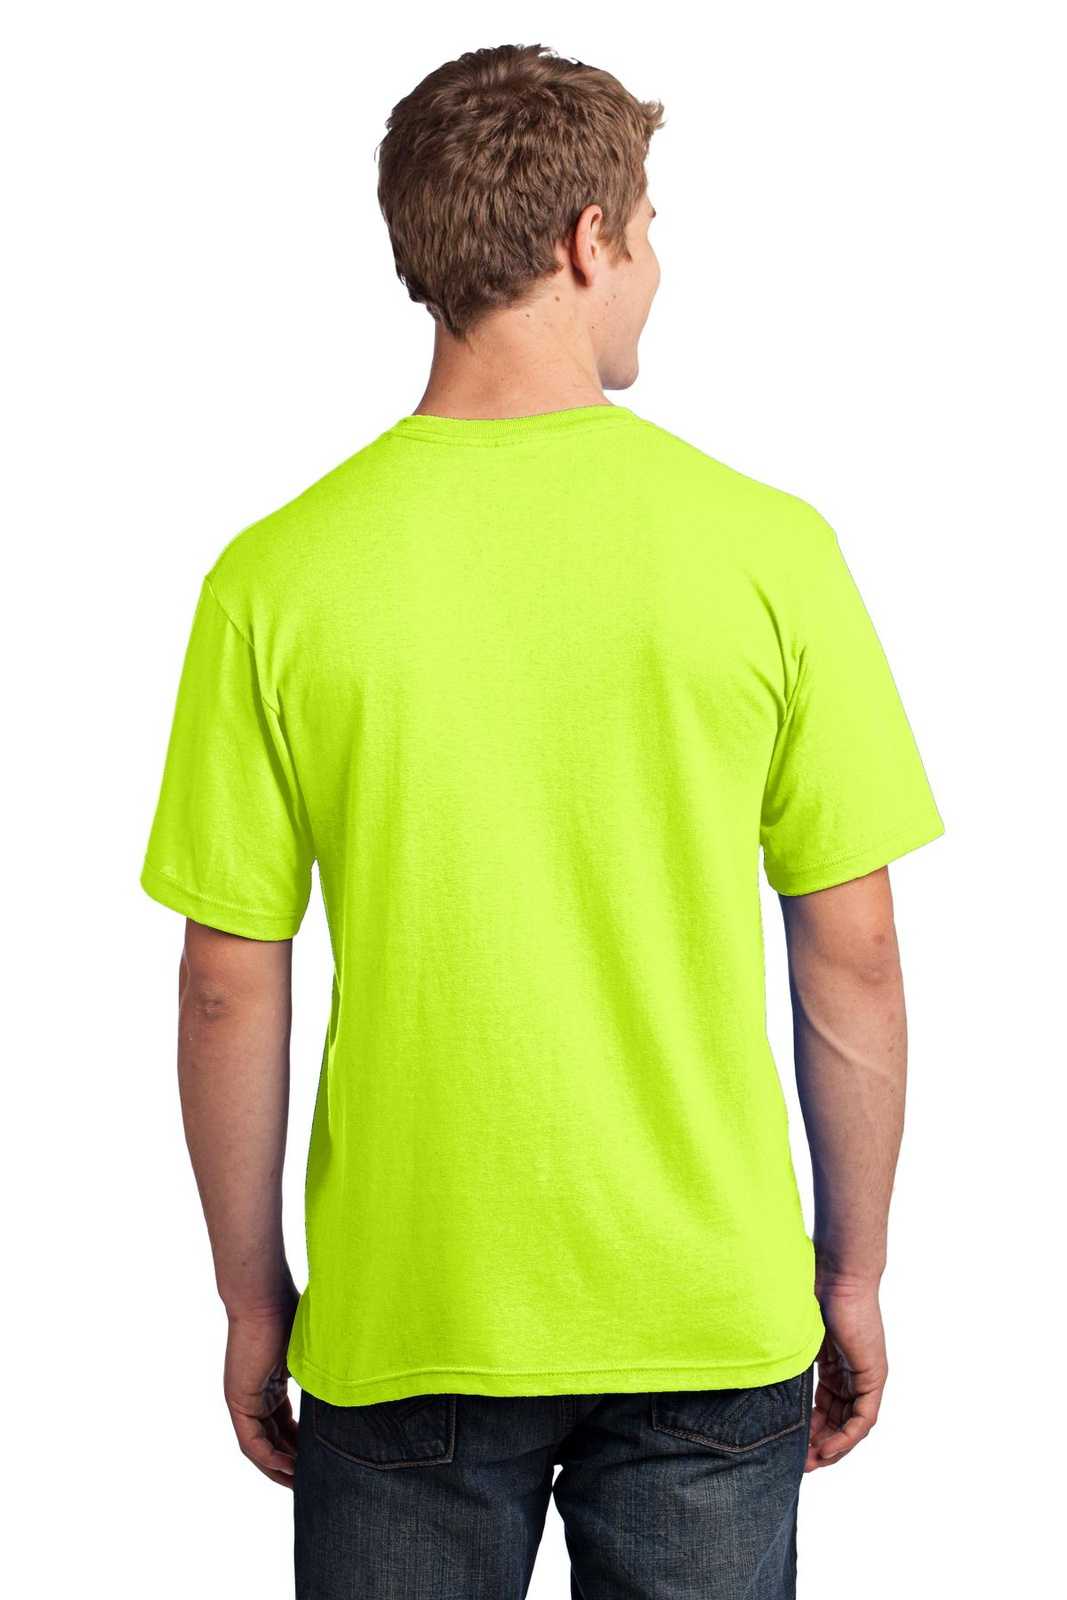 Port & Company USA100 All-American Tee - Safety Green - HIT a Double - 1